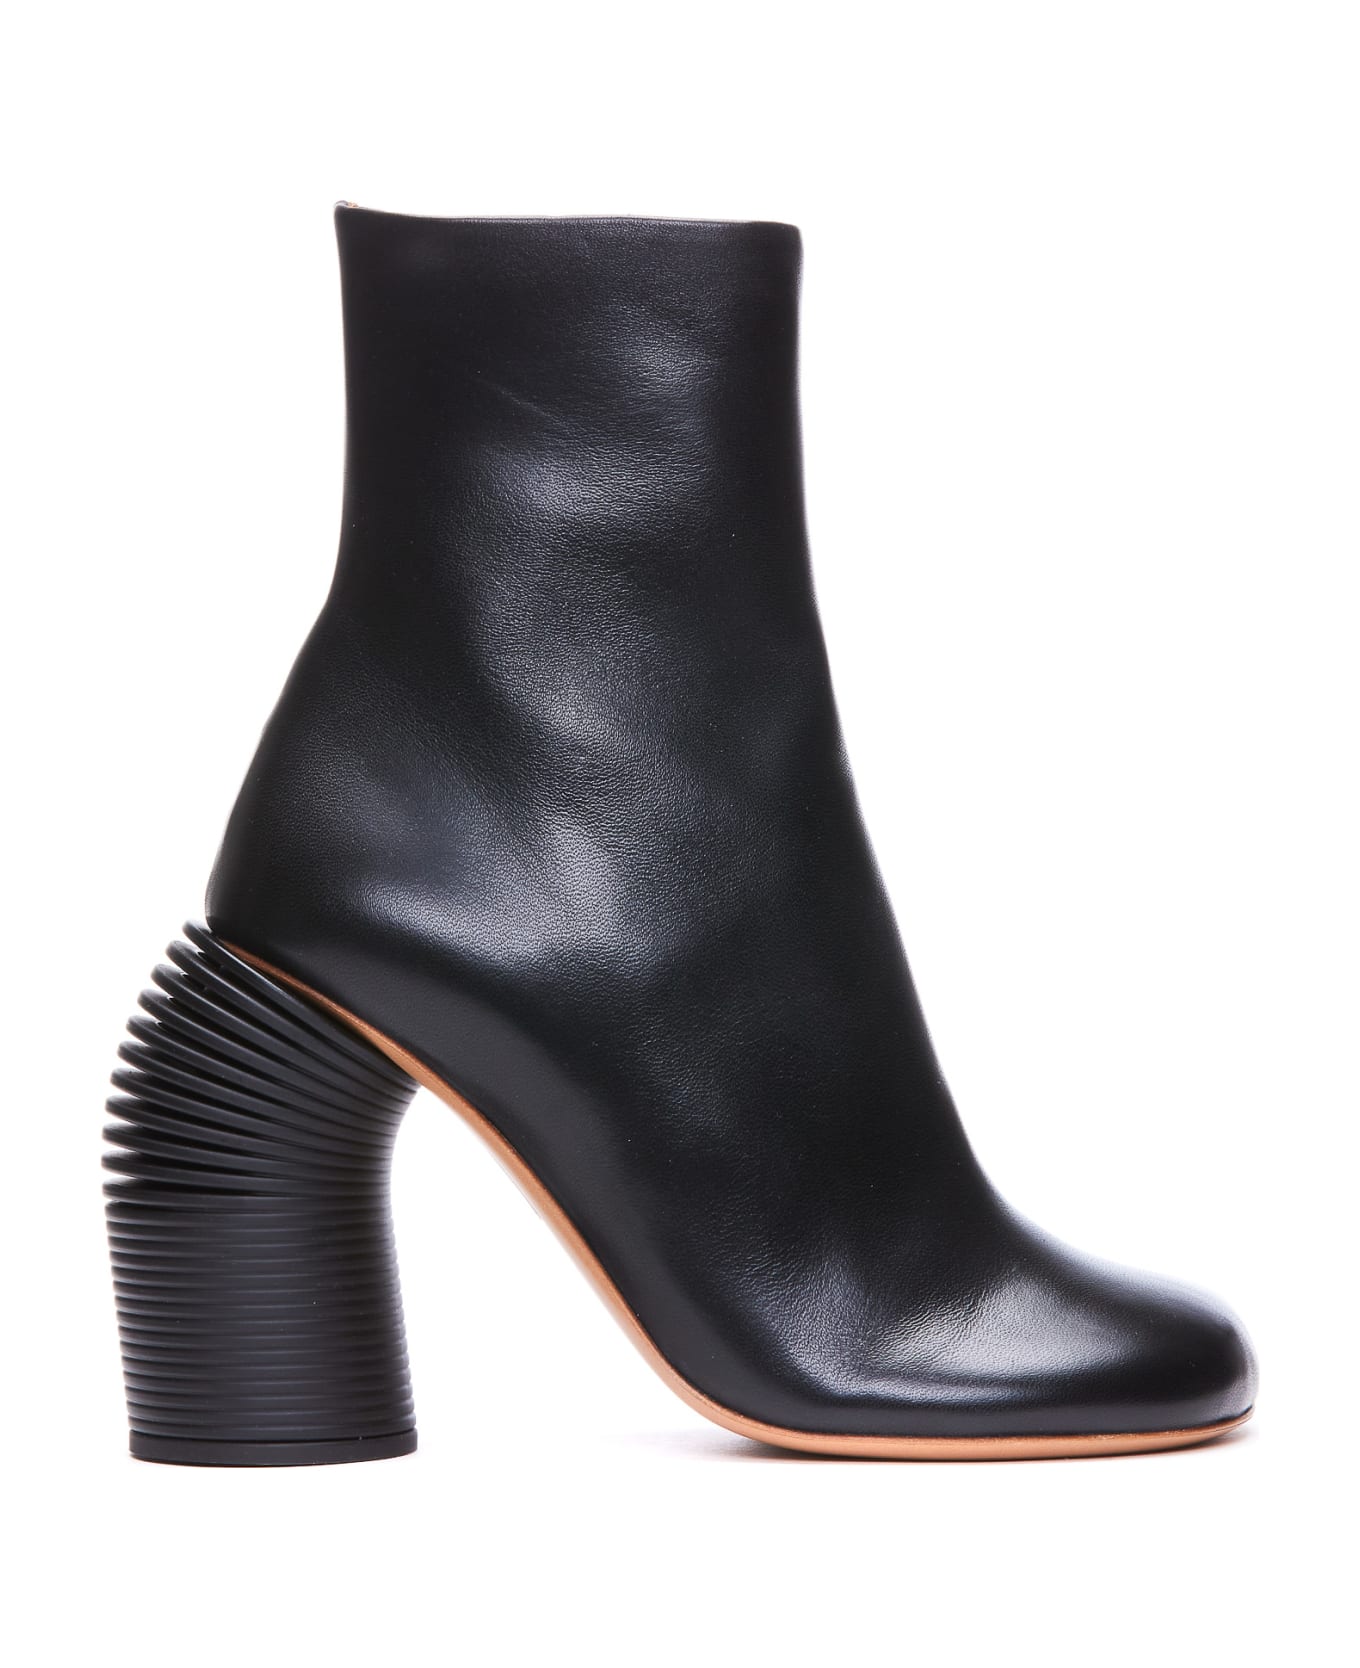 Off-White Spring Ankle Boots - Nero